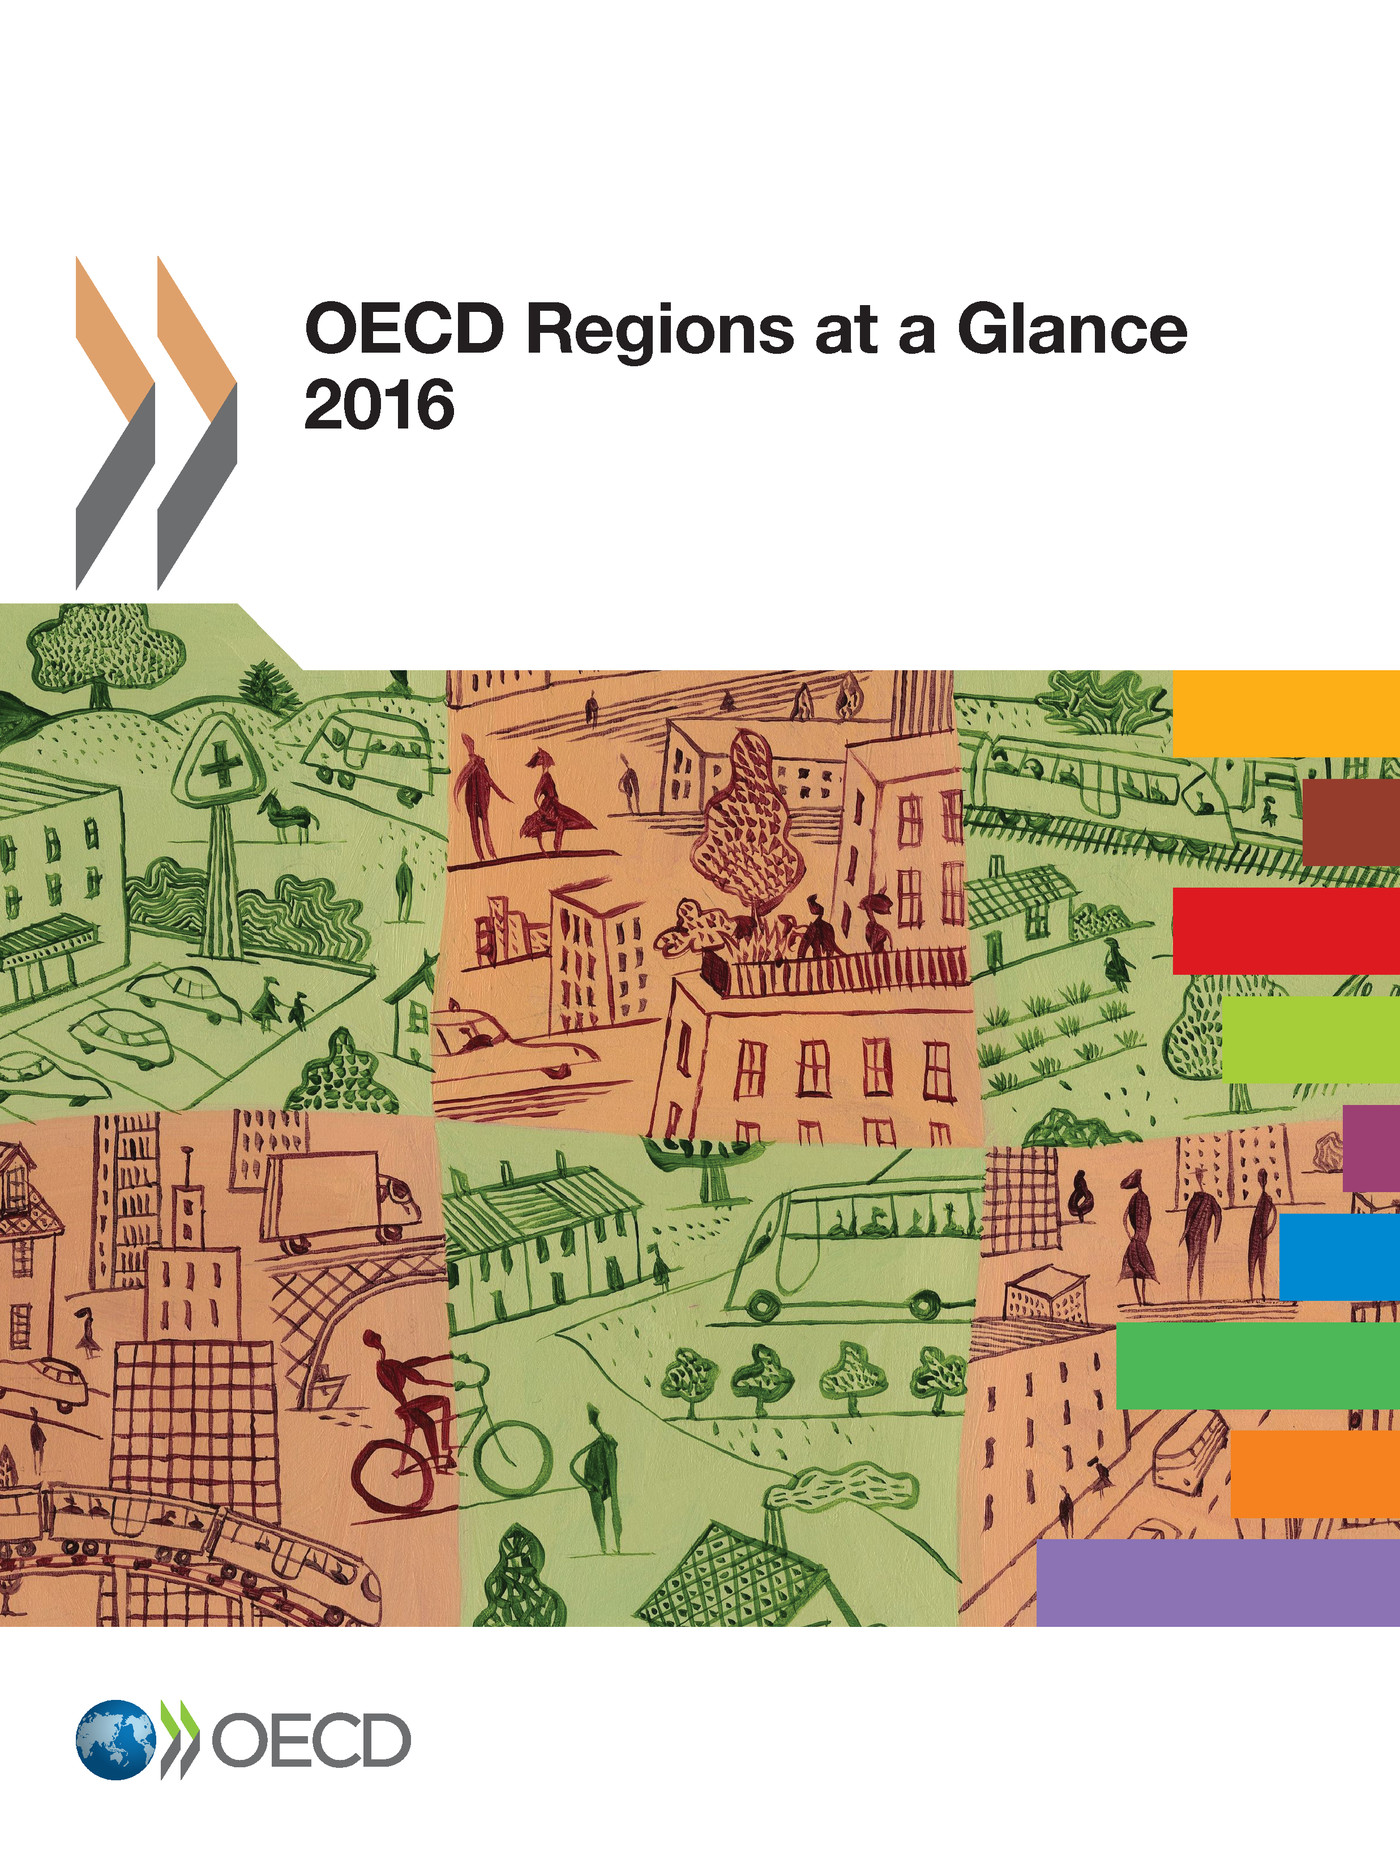 OECD Regions at a Glance 2016 -  Collectif - OCDE / OECD